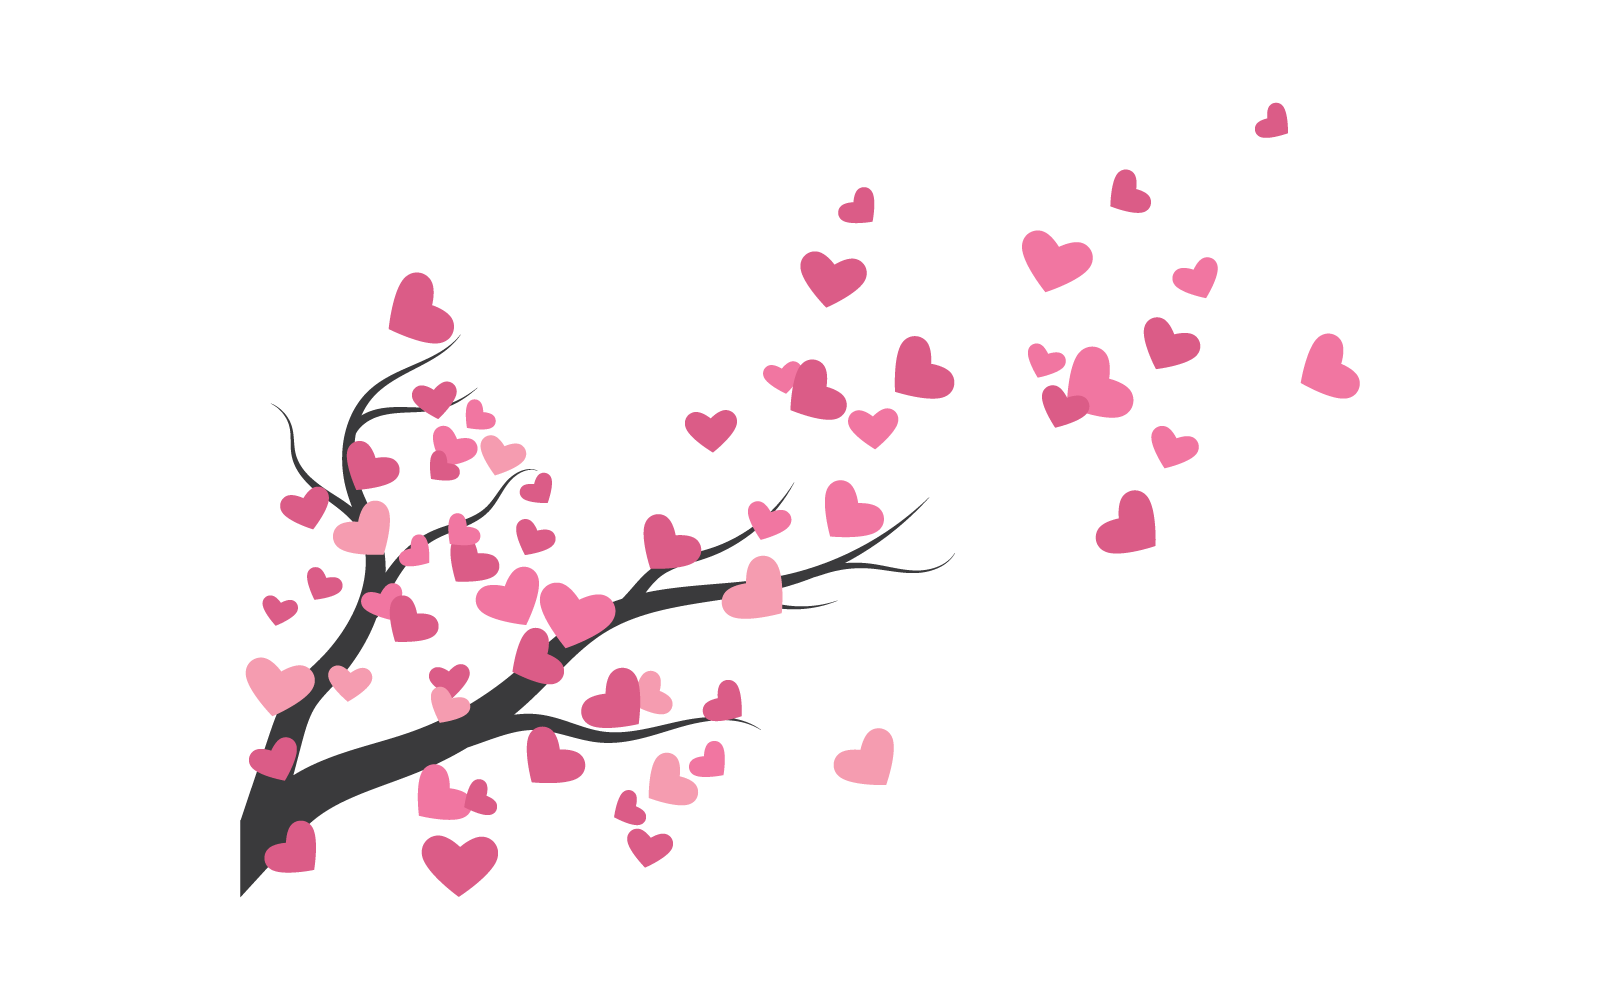 Tree With Heart Leaves Vector flat Design